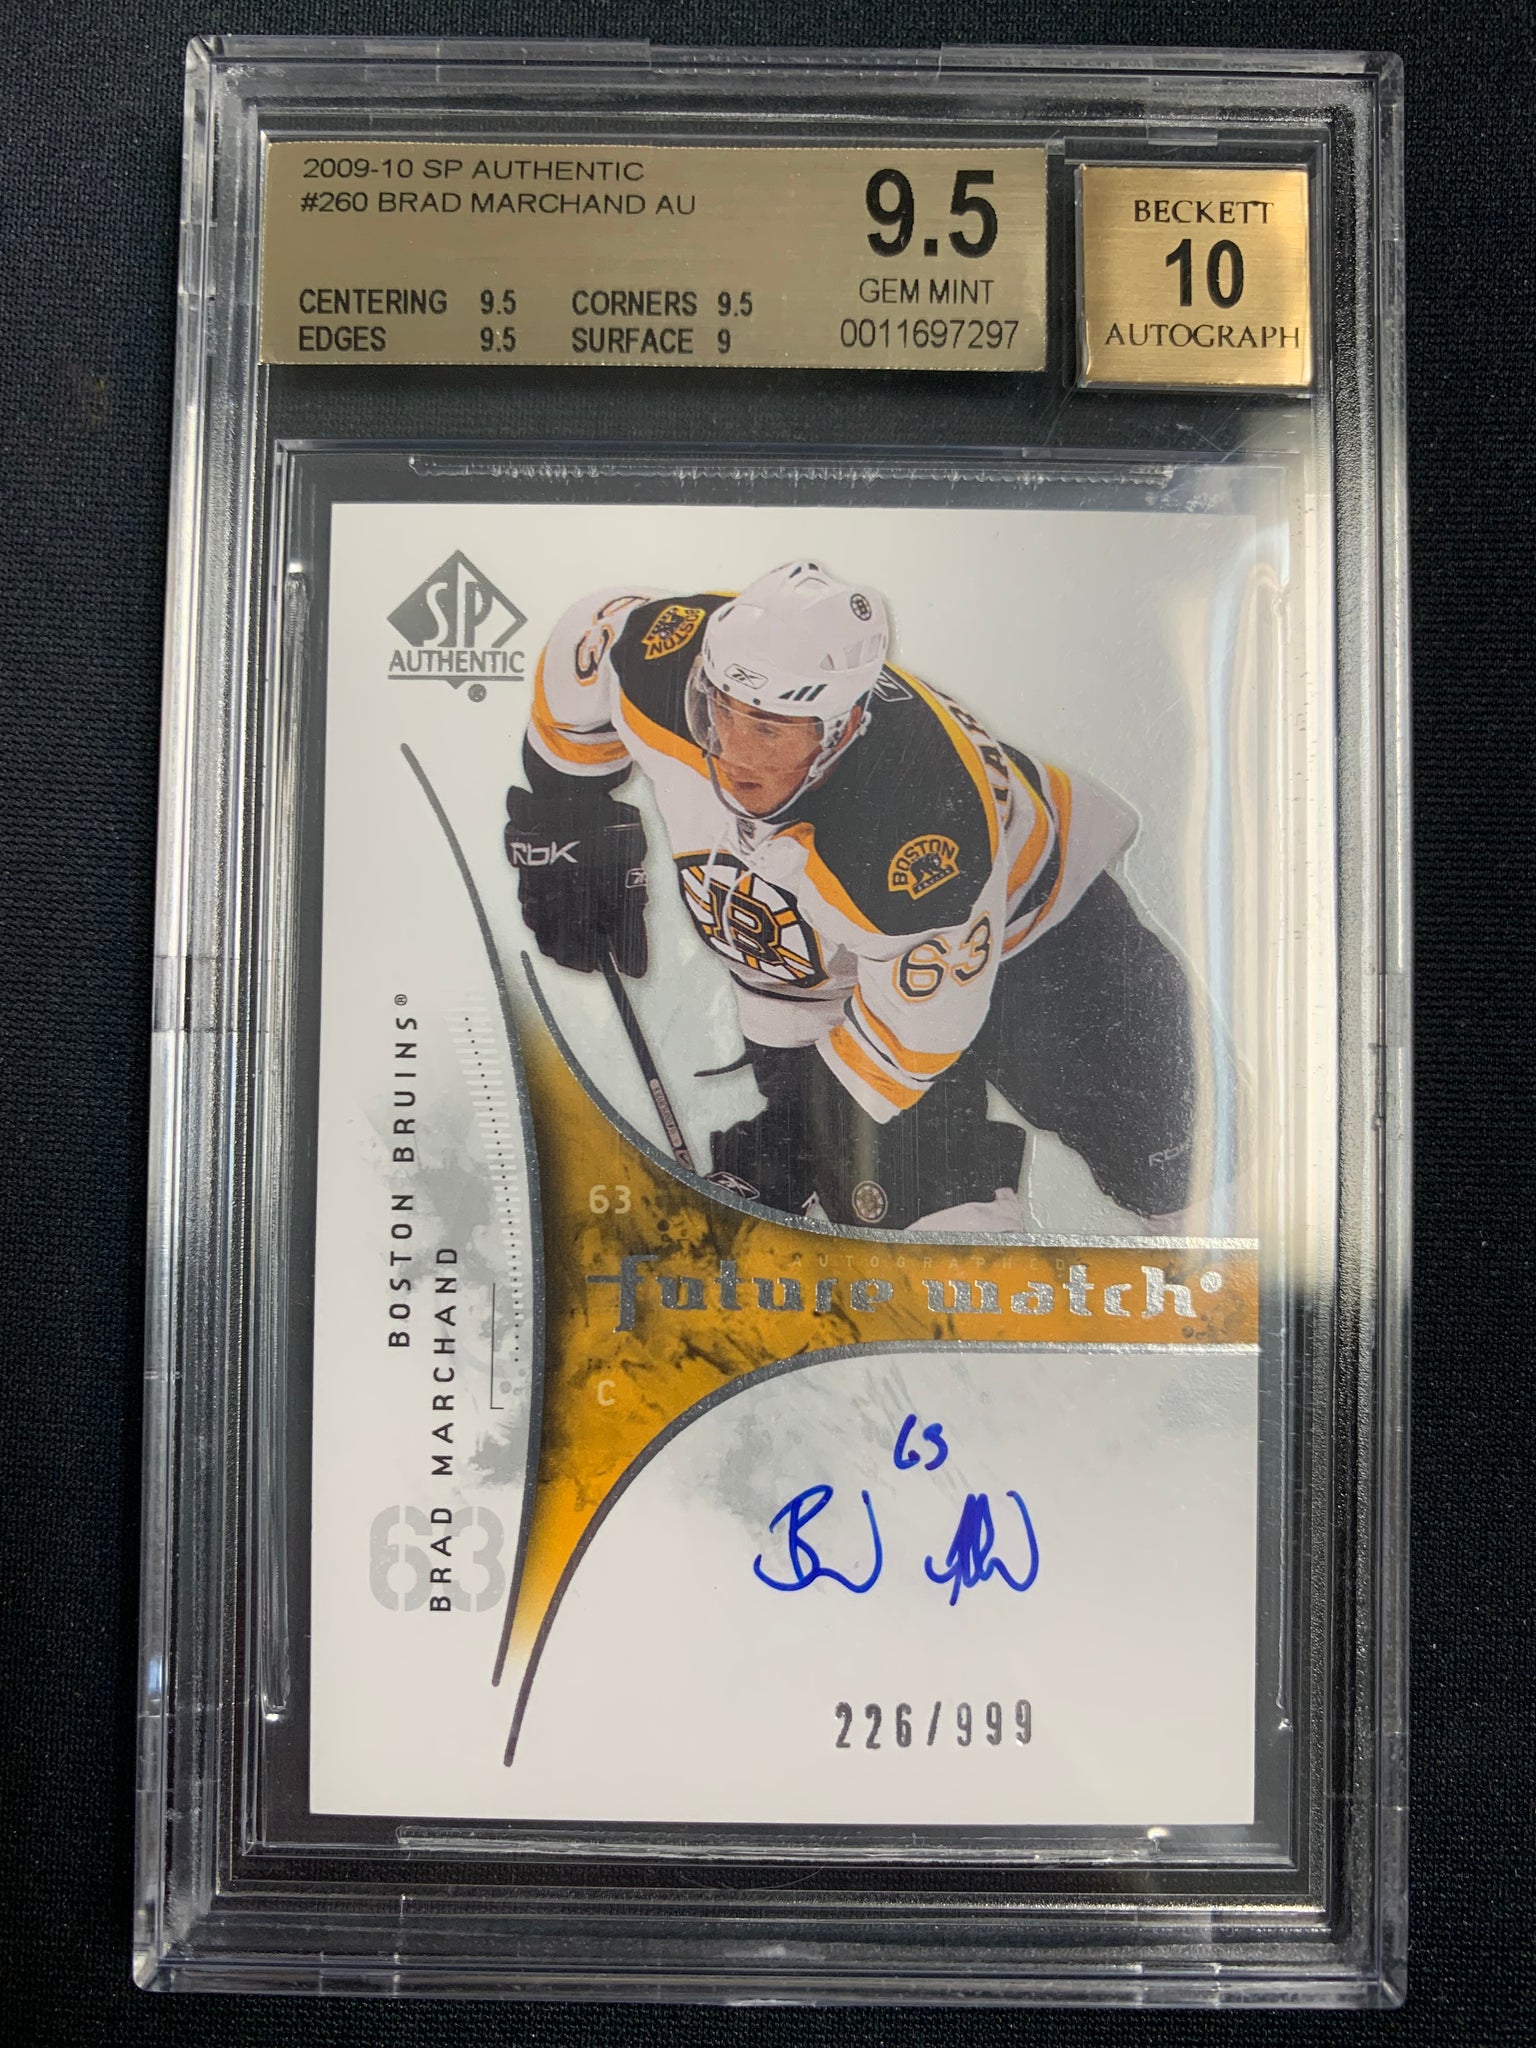 2009-10 UD SP AUTHENTIC HOCKEY #260 BOSTON BRUINS - BRAD MARCHAND FUTURE WATCH AUTO ROOKIE 226/999 GRADED BGS 9.5 GEM MINT